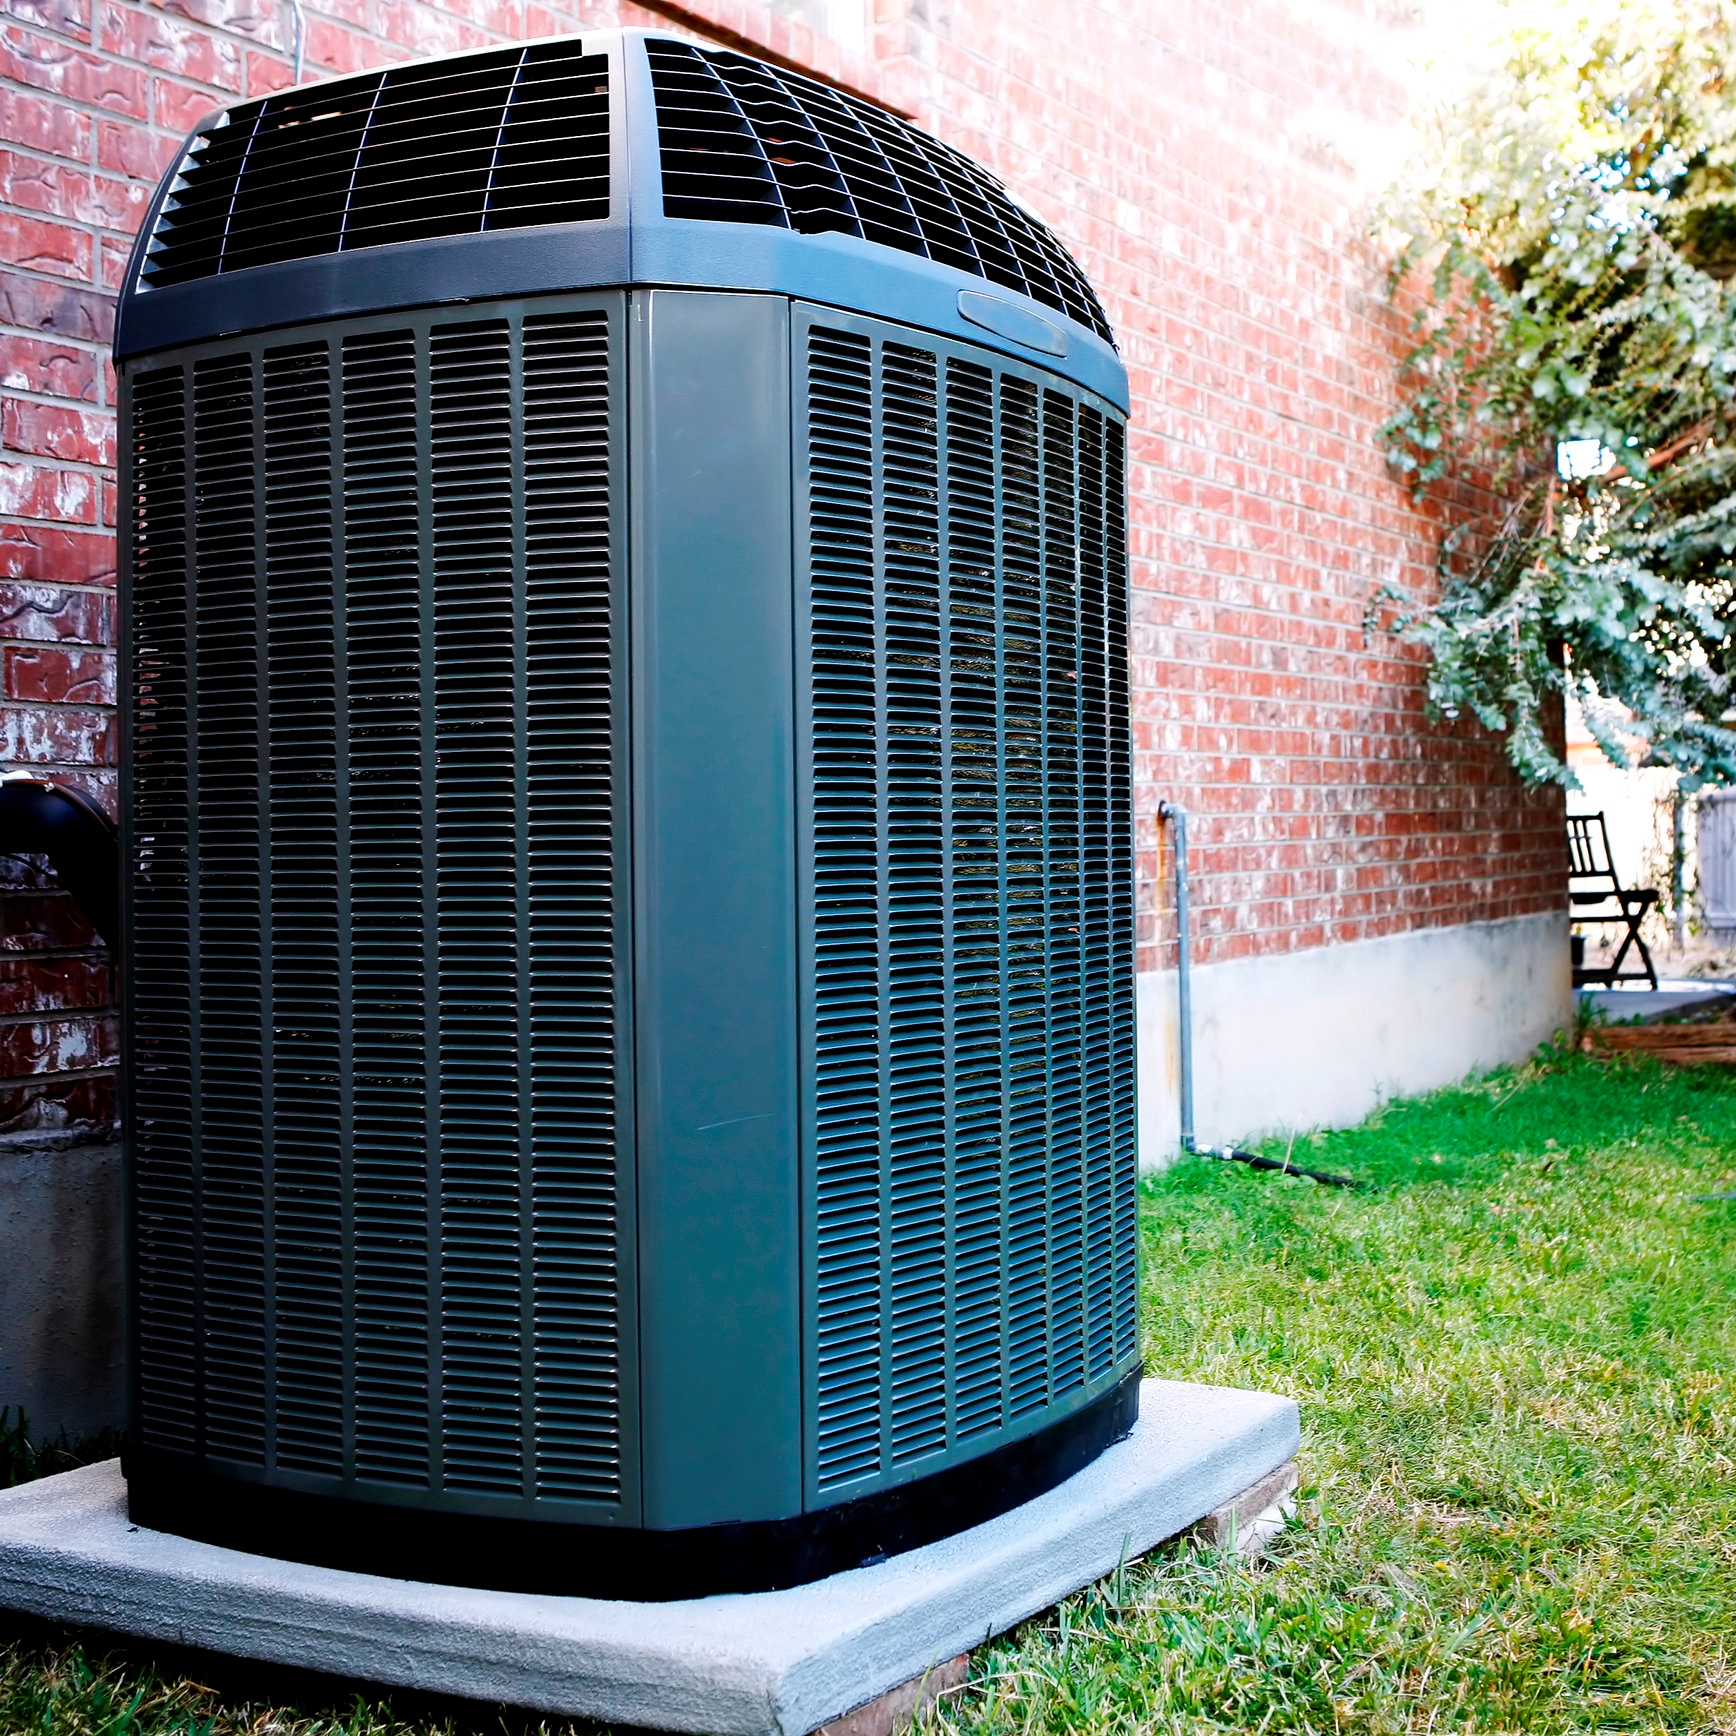 Carrier air conditioning units